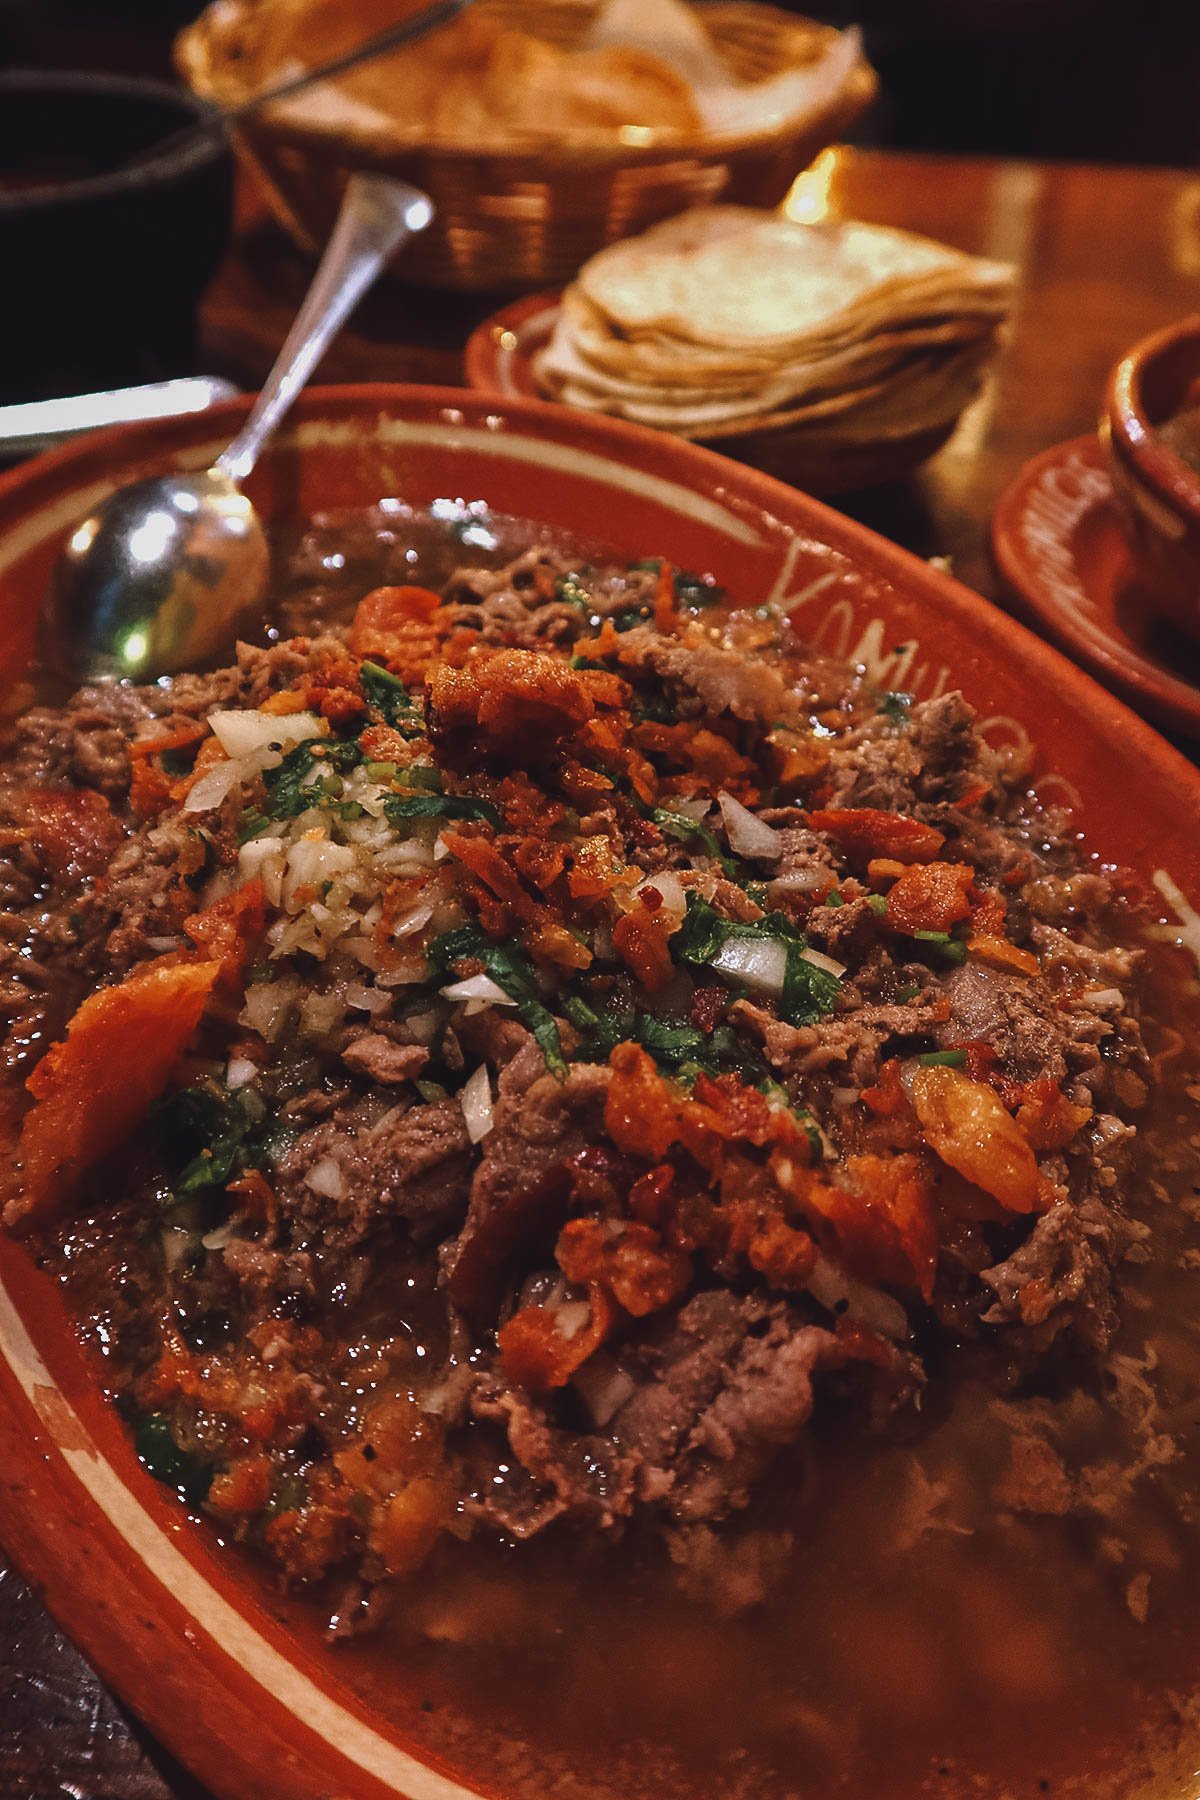 Beef steak cooked in its own juices, a must-try Guadalajara dish